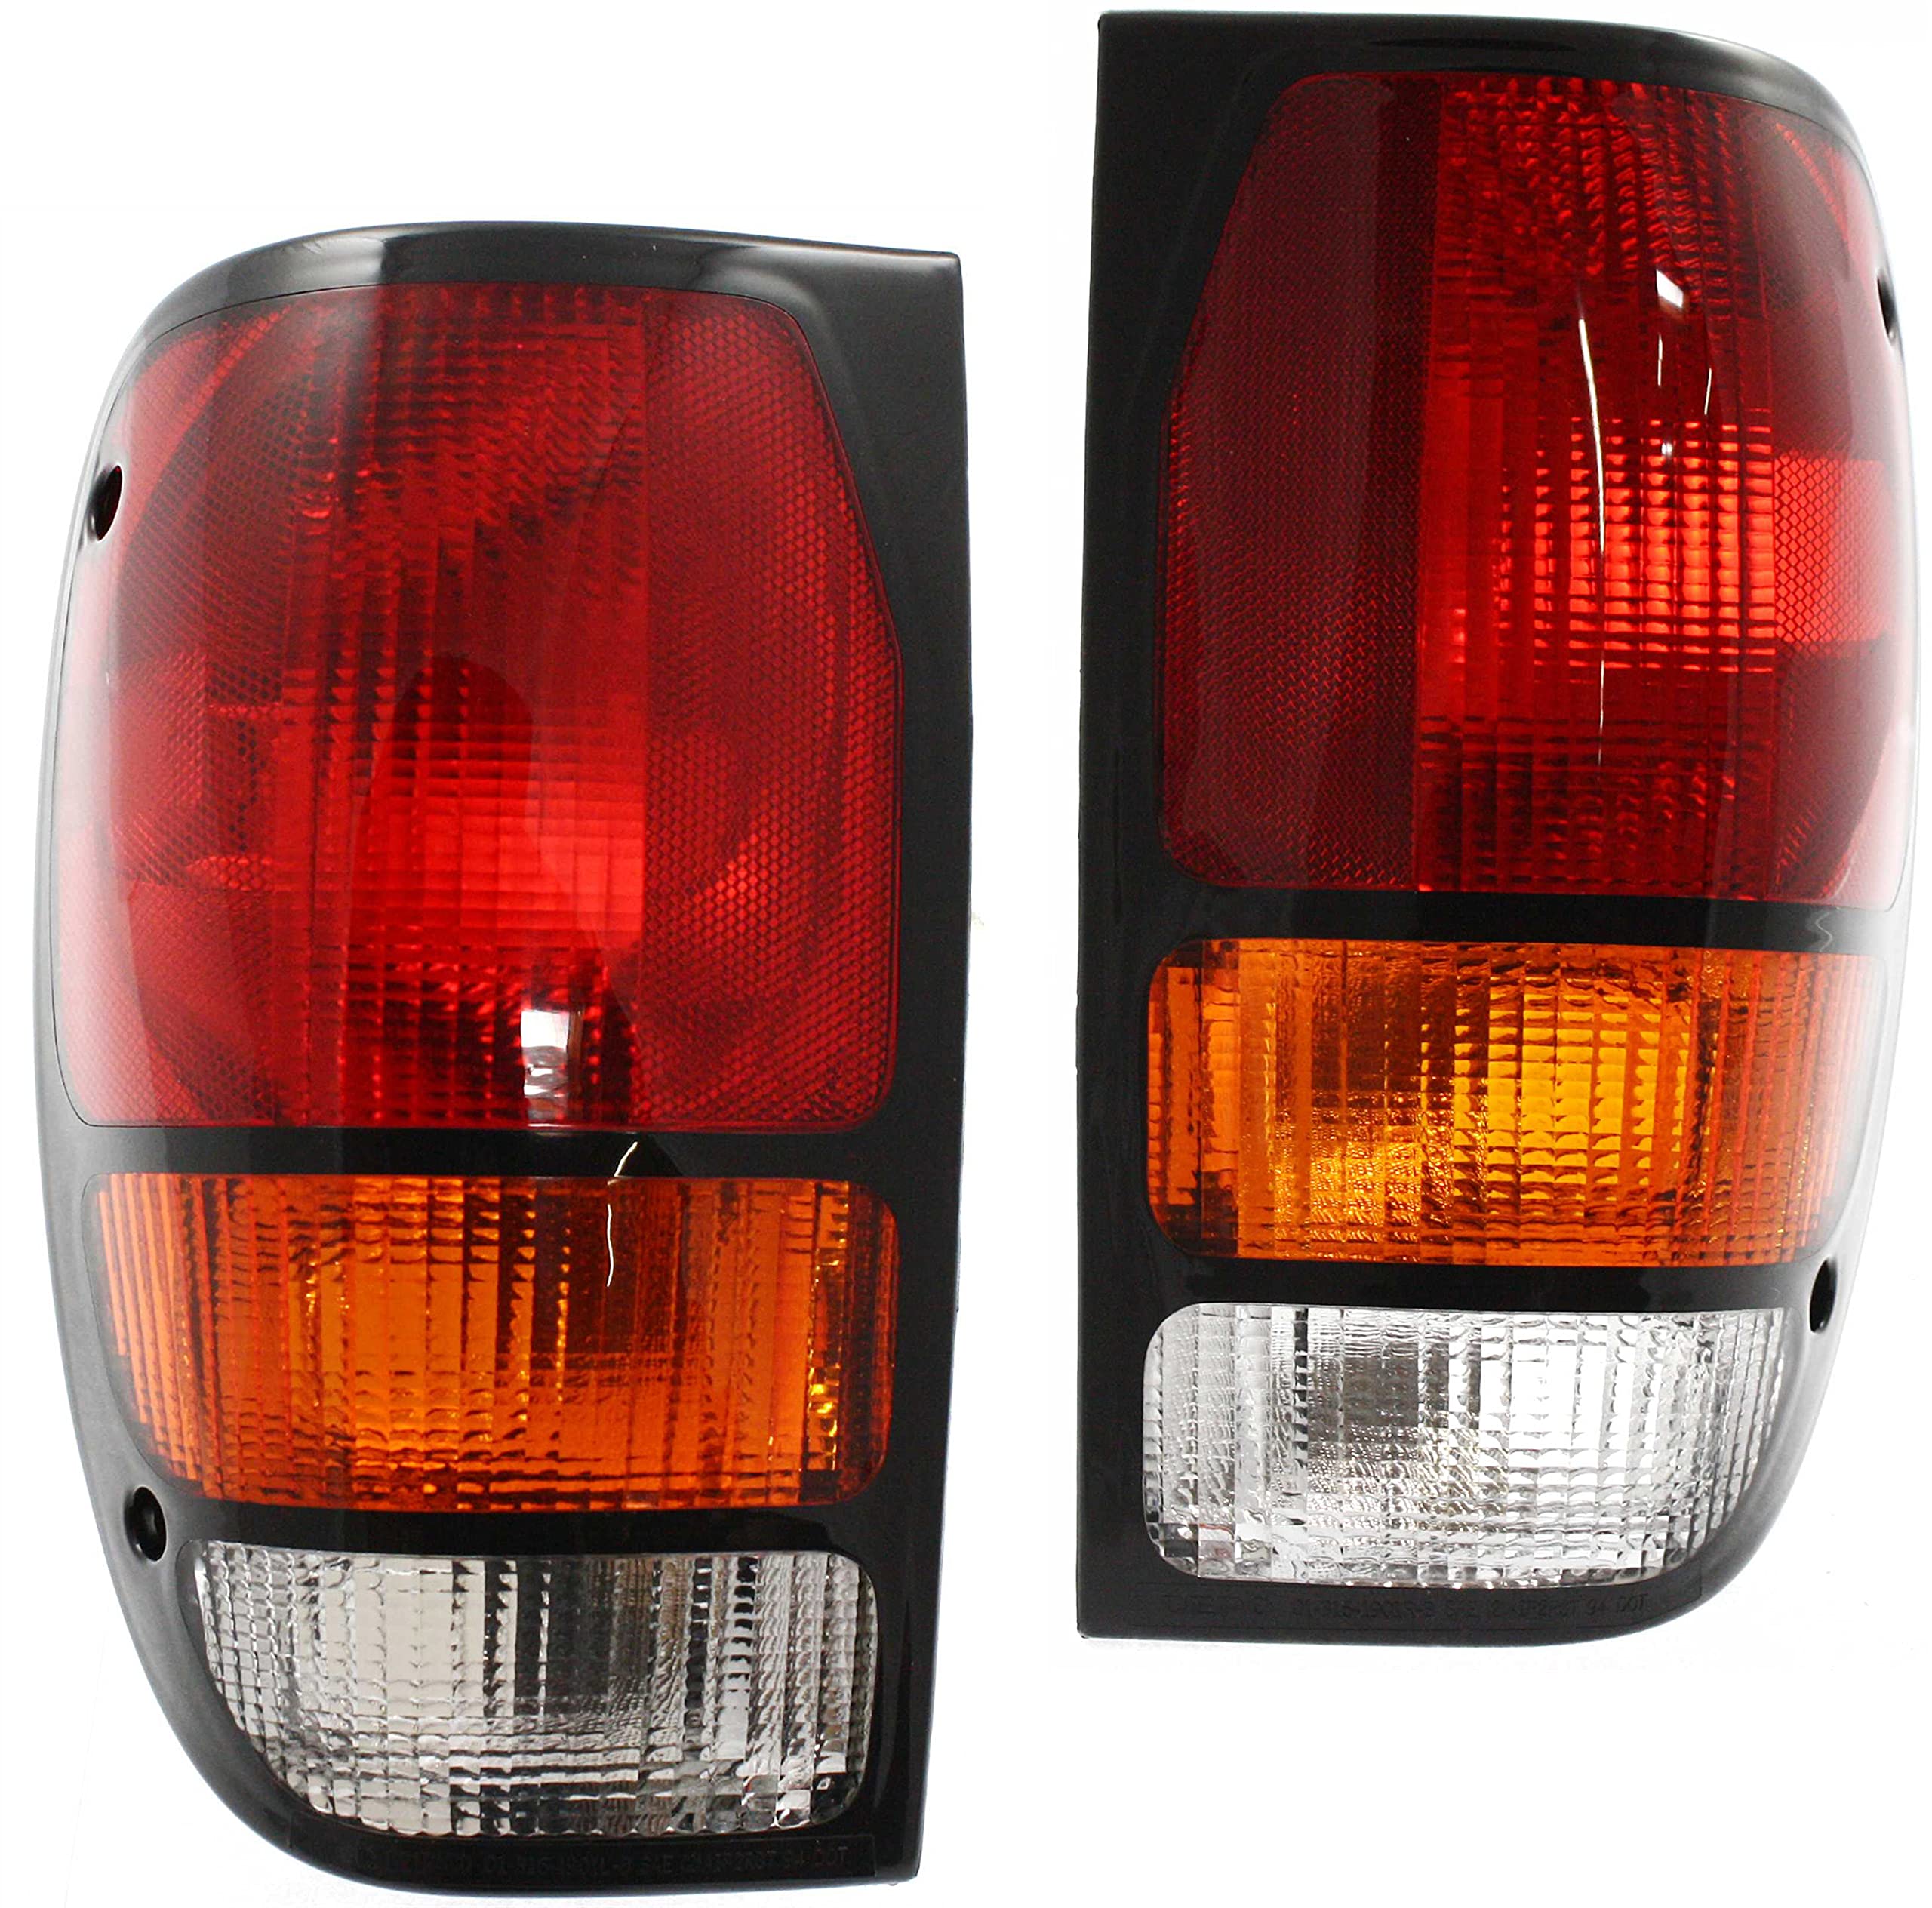 Amazon.com: EVAN FISCHER Driver and Passenger Side Tail Light Set of 2  Compatible with 1994-2000 Mazda B3000 & 1994-1997 Mazda B2300 Partslink  MA2801108, MA2800108 : Automotive